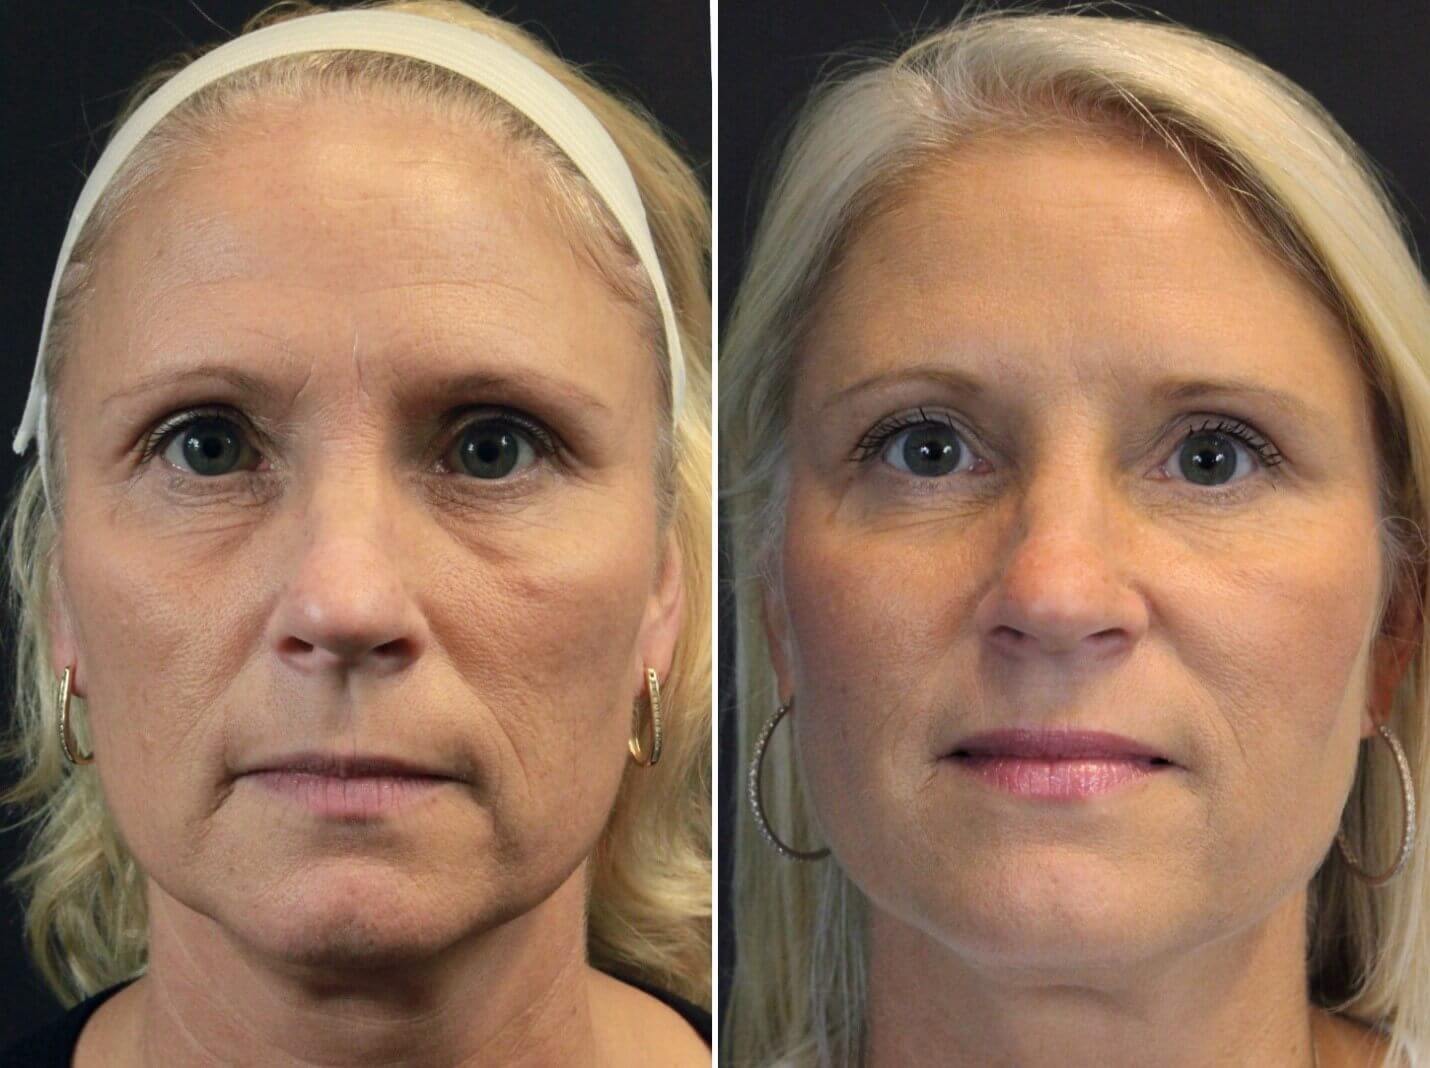 Silhouette Instalift Results are simply amazing for the right candidate - Patient before and after courtesy of instalift.com